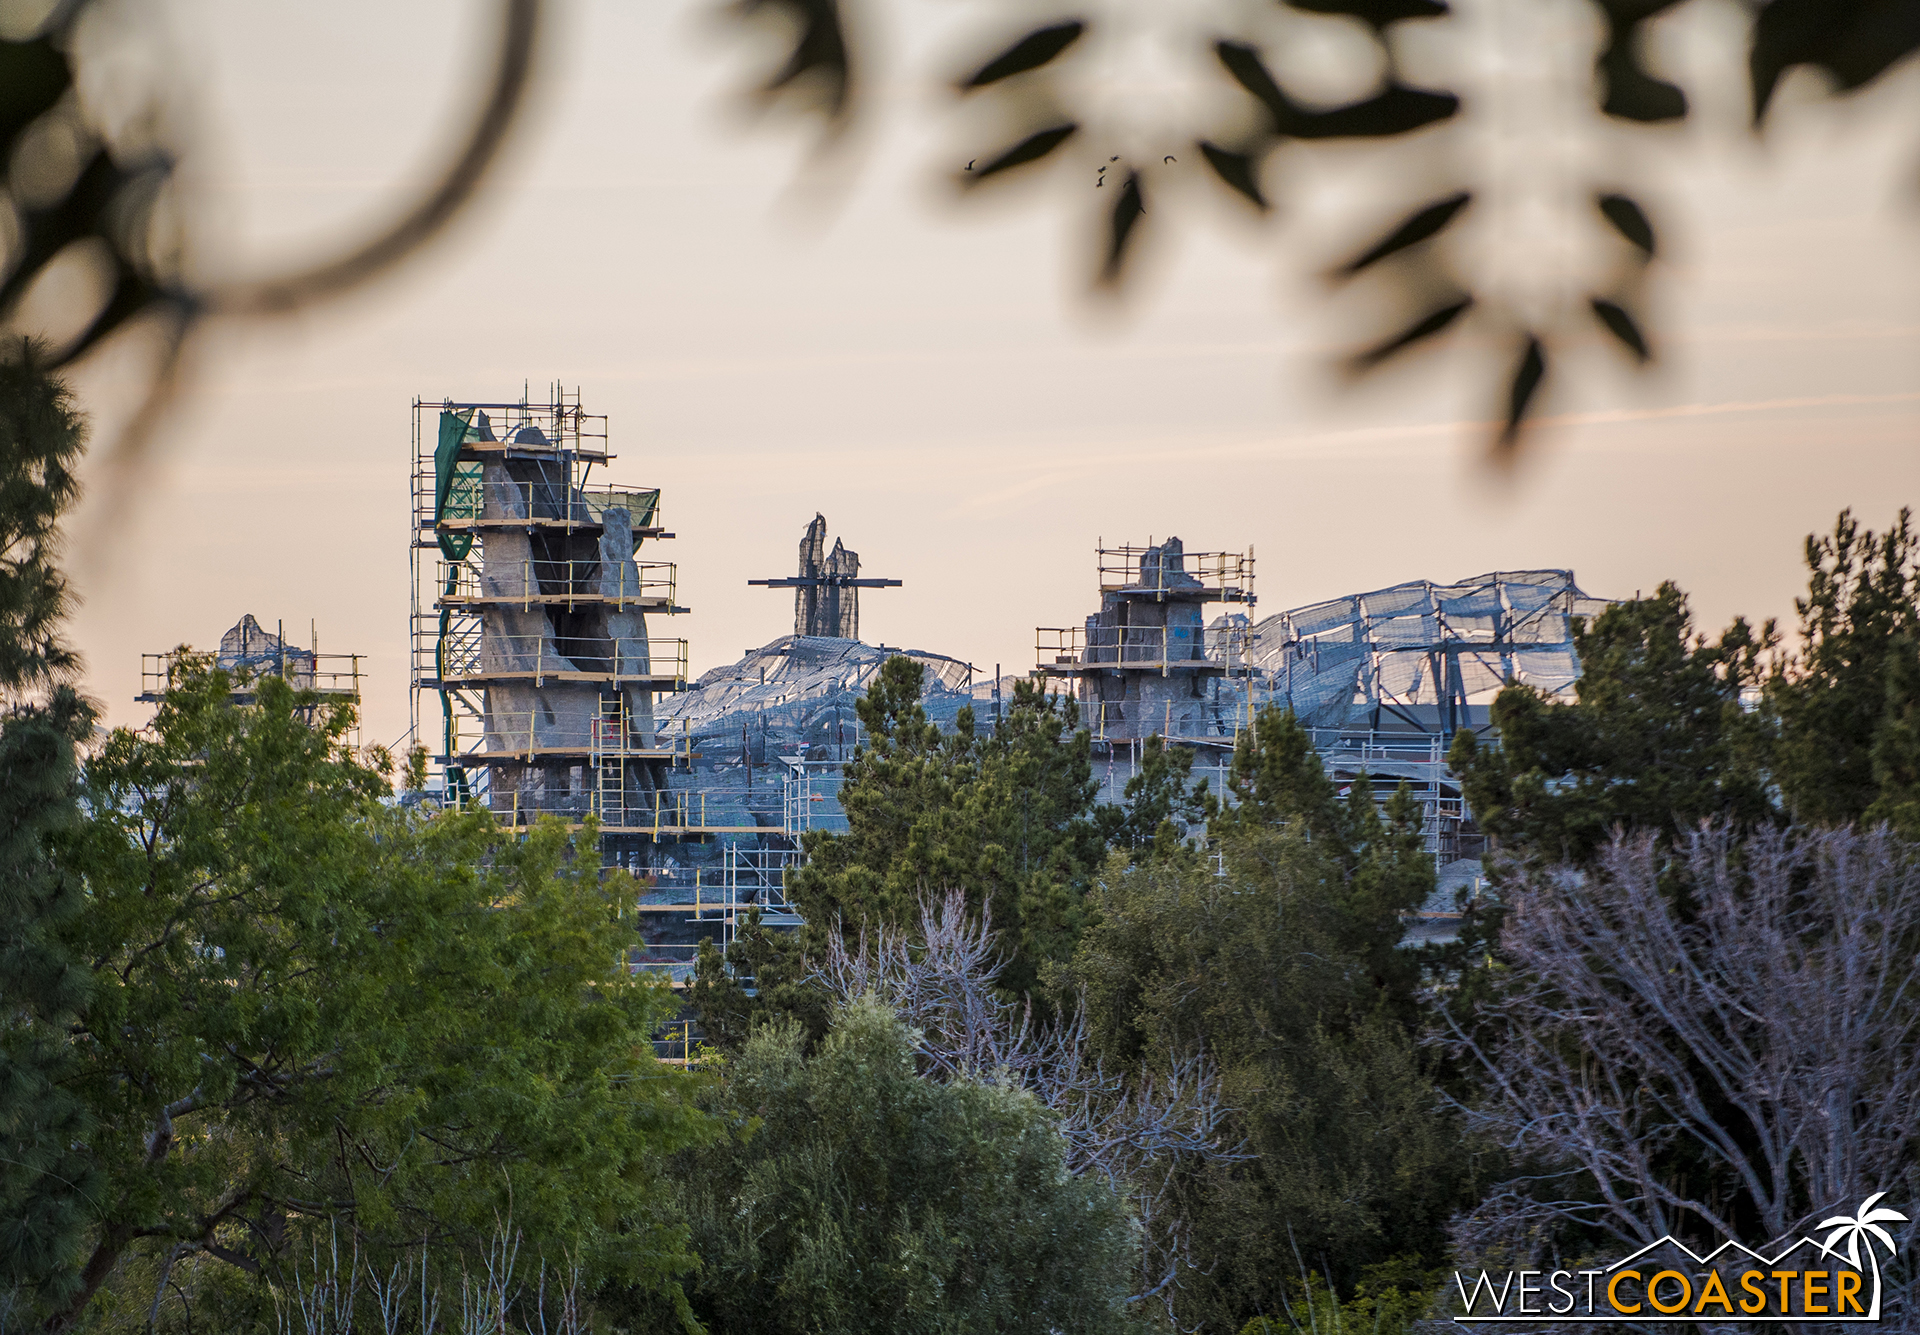  And some more snippets above the trees when looking from Tarzan's Treehouse. 